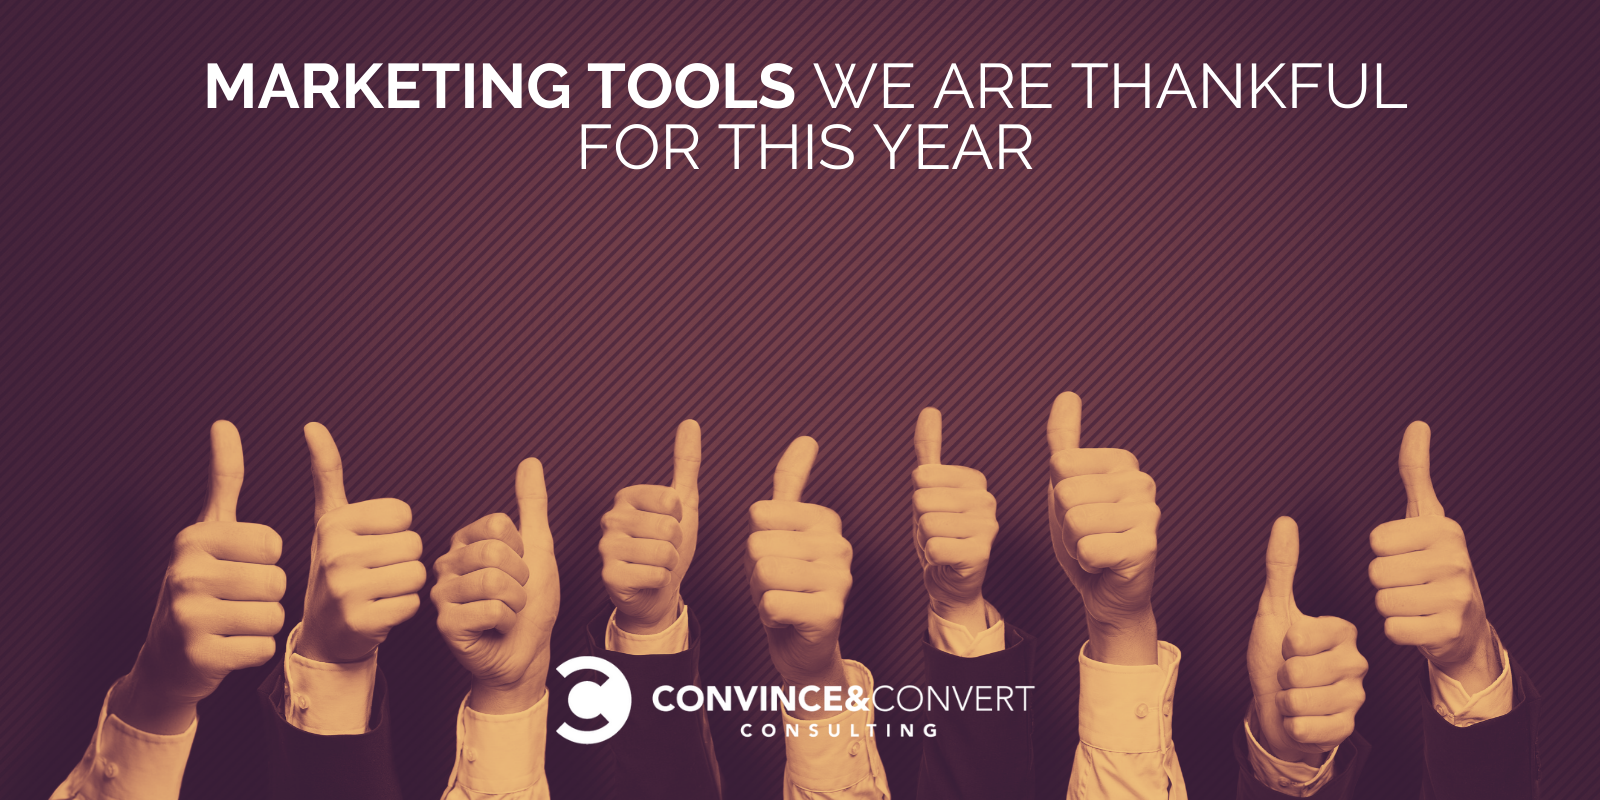 12 Marketing Tools We Are Thankful for This Year